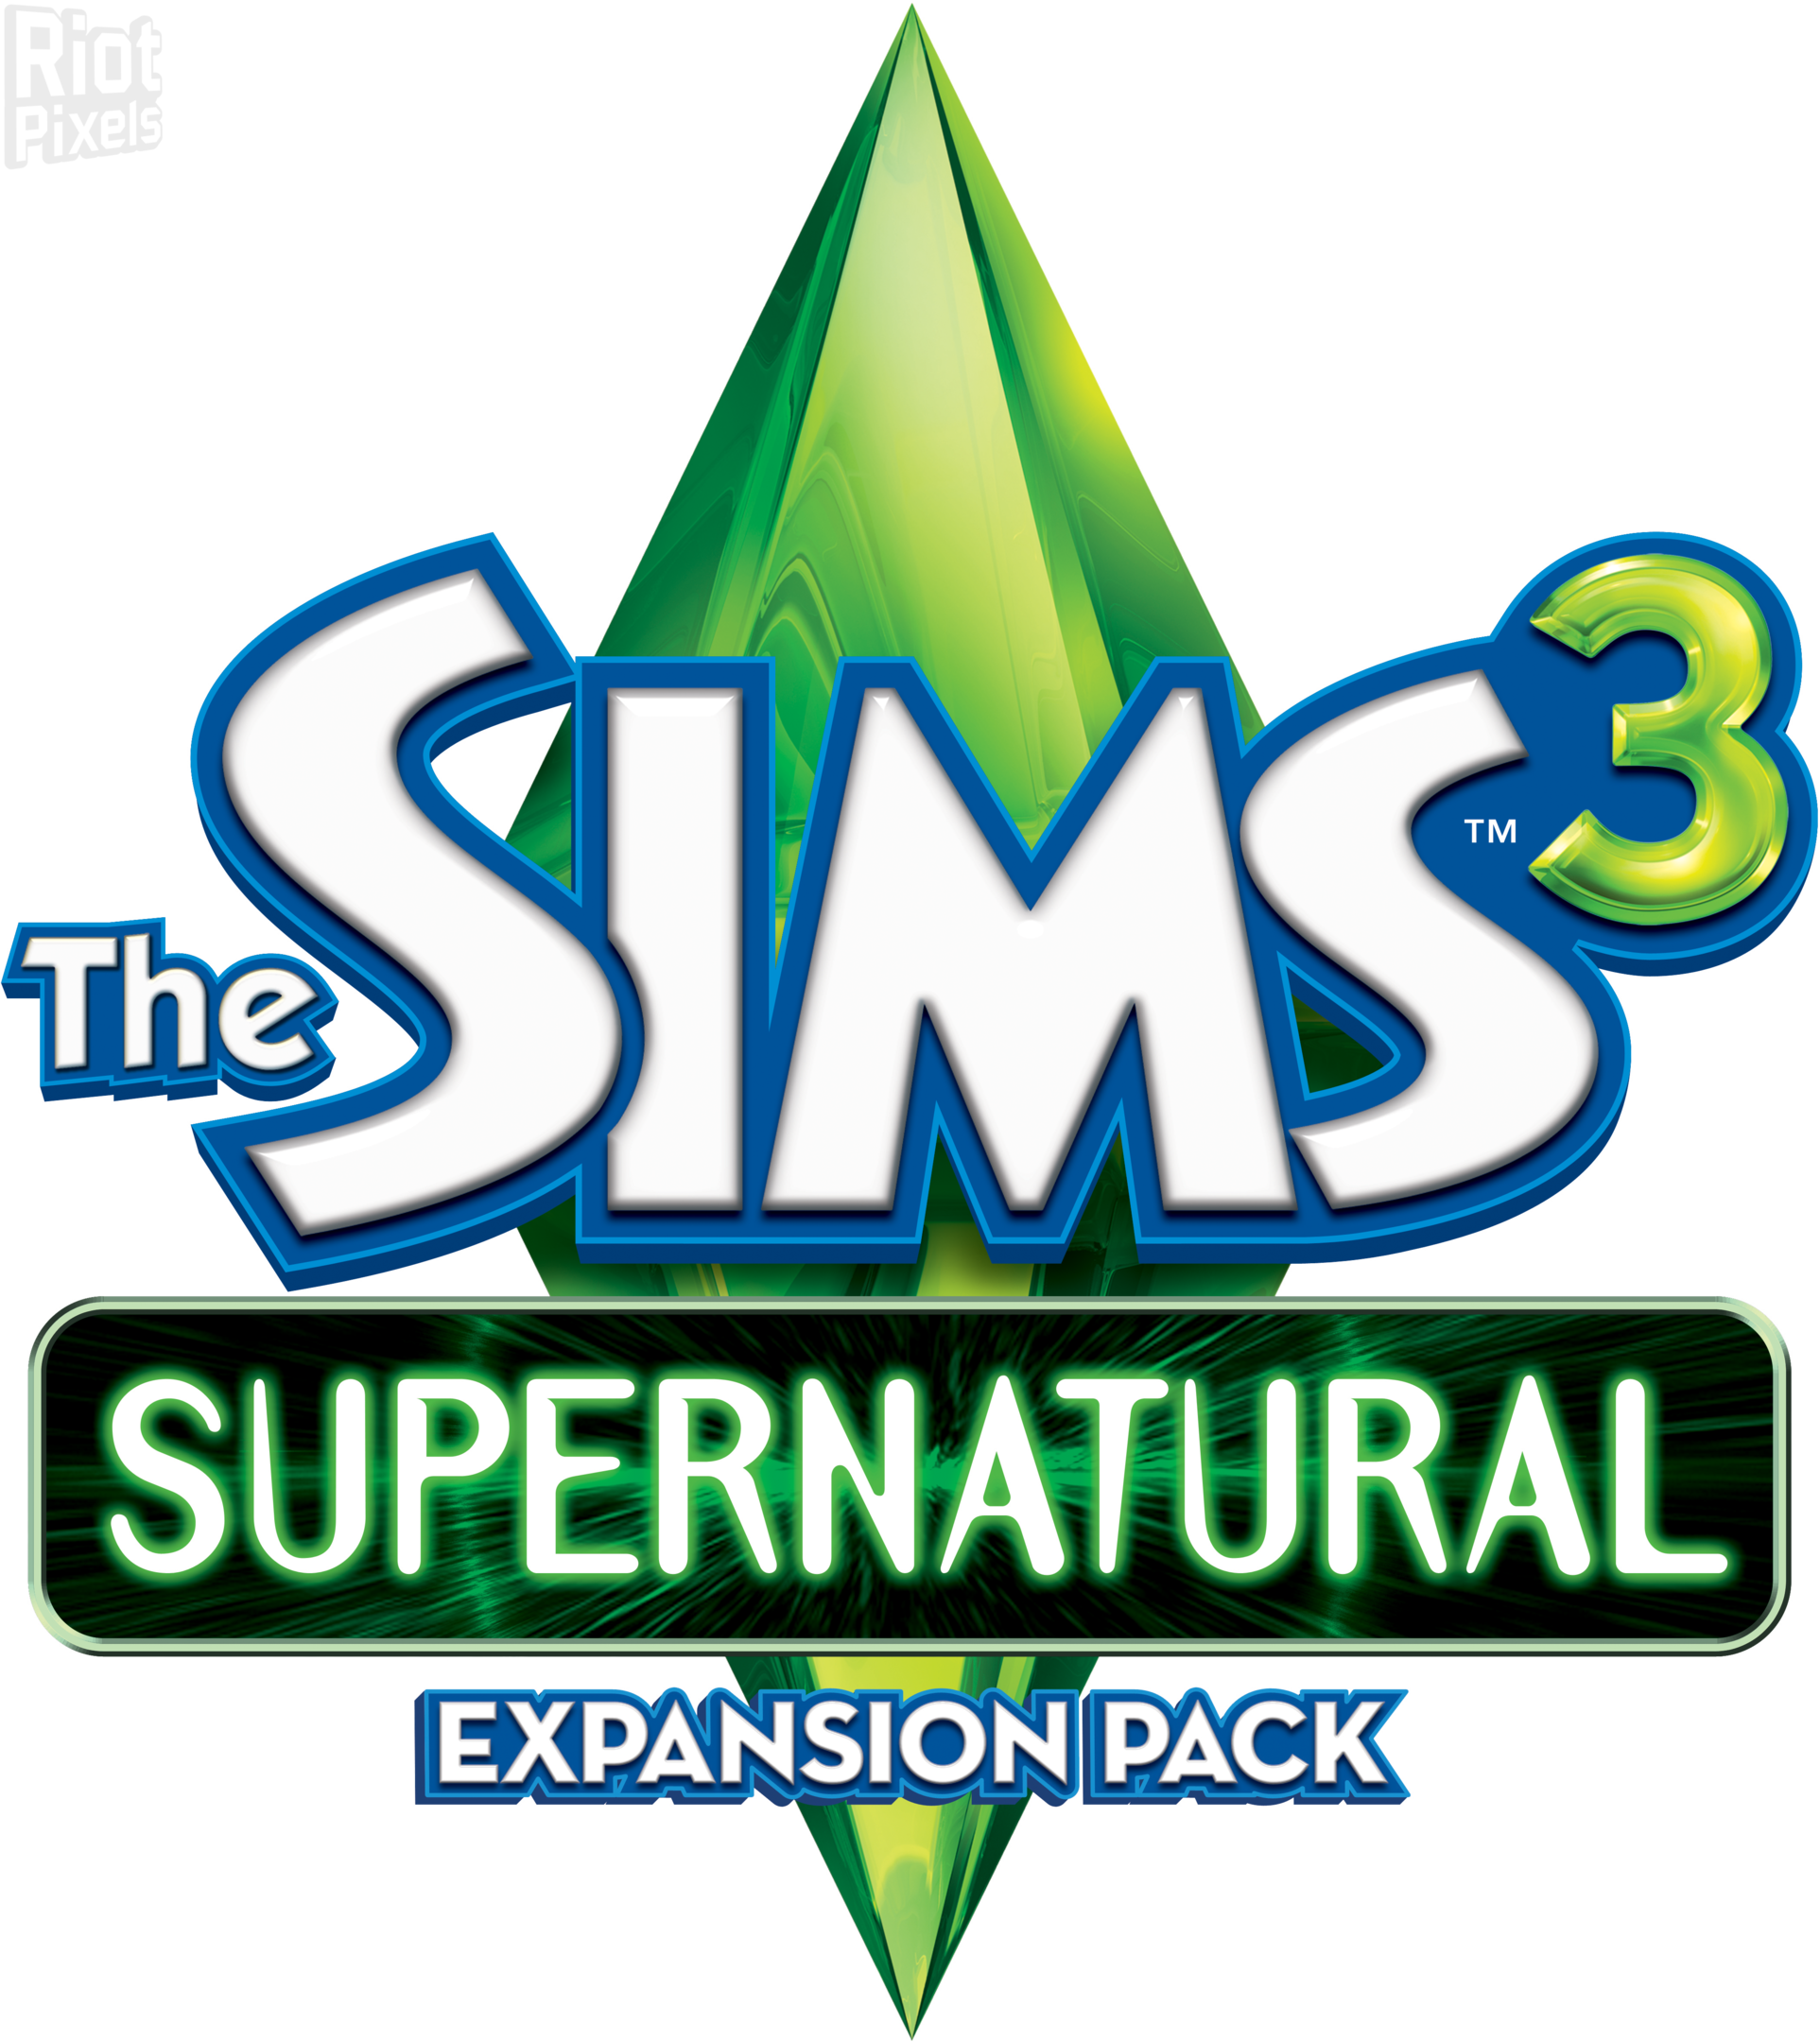 How to Download/install Sims 3 Supernatural CRACK - YouTube